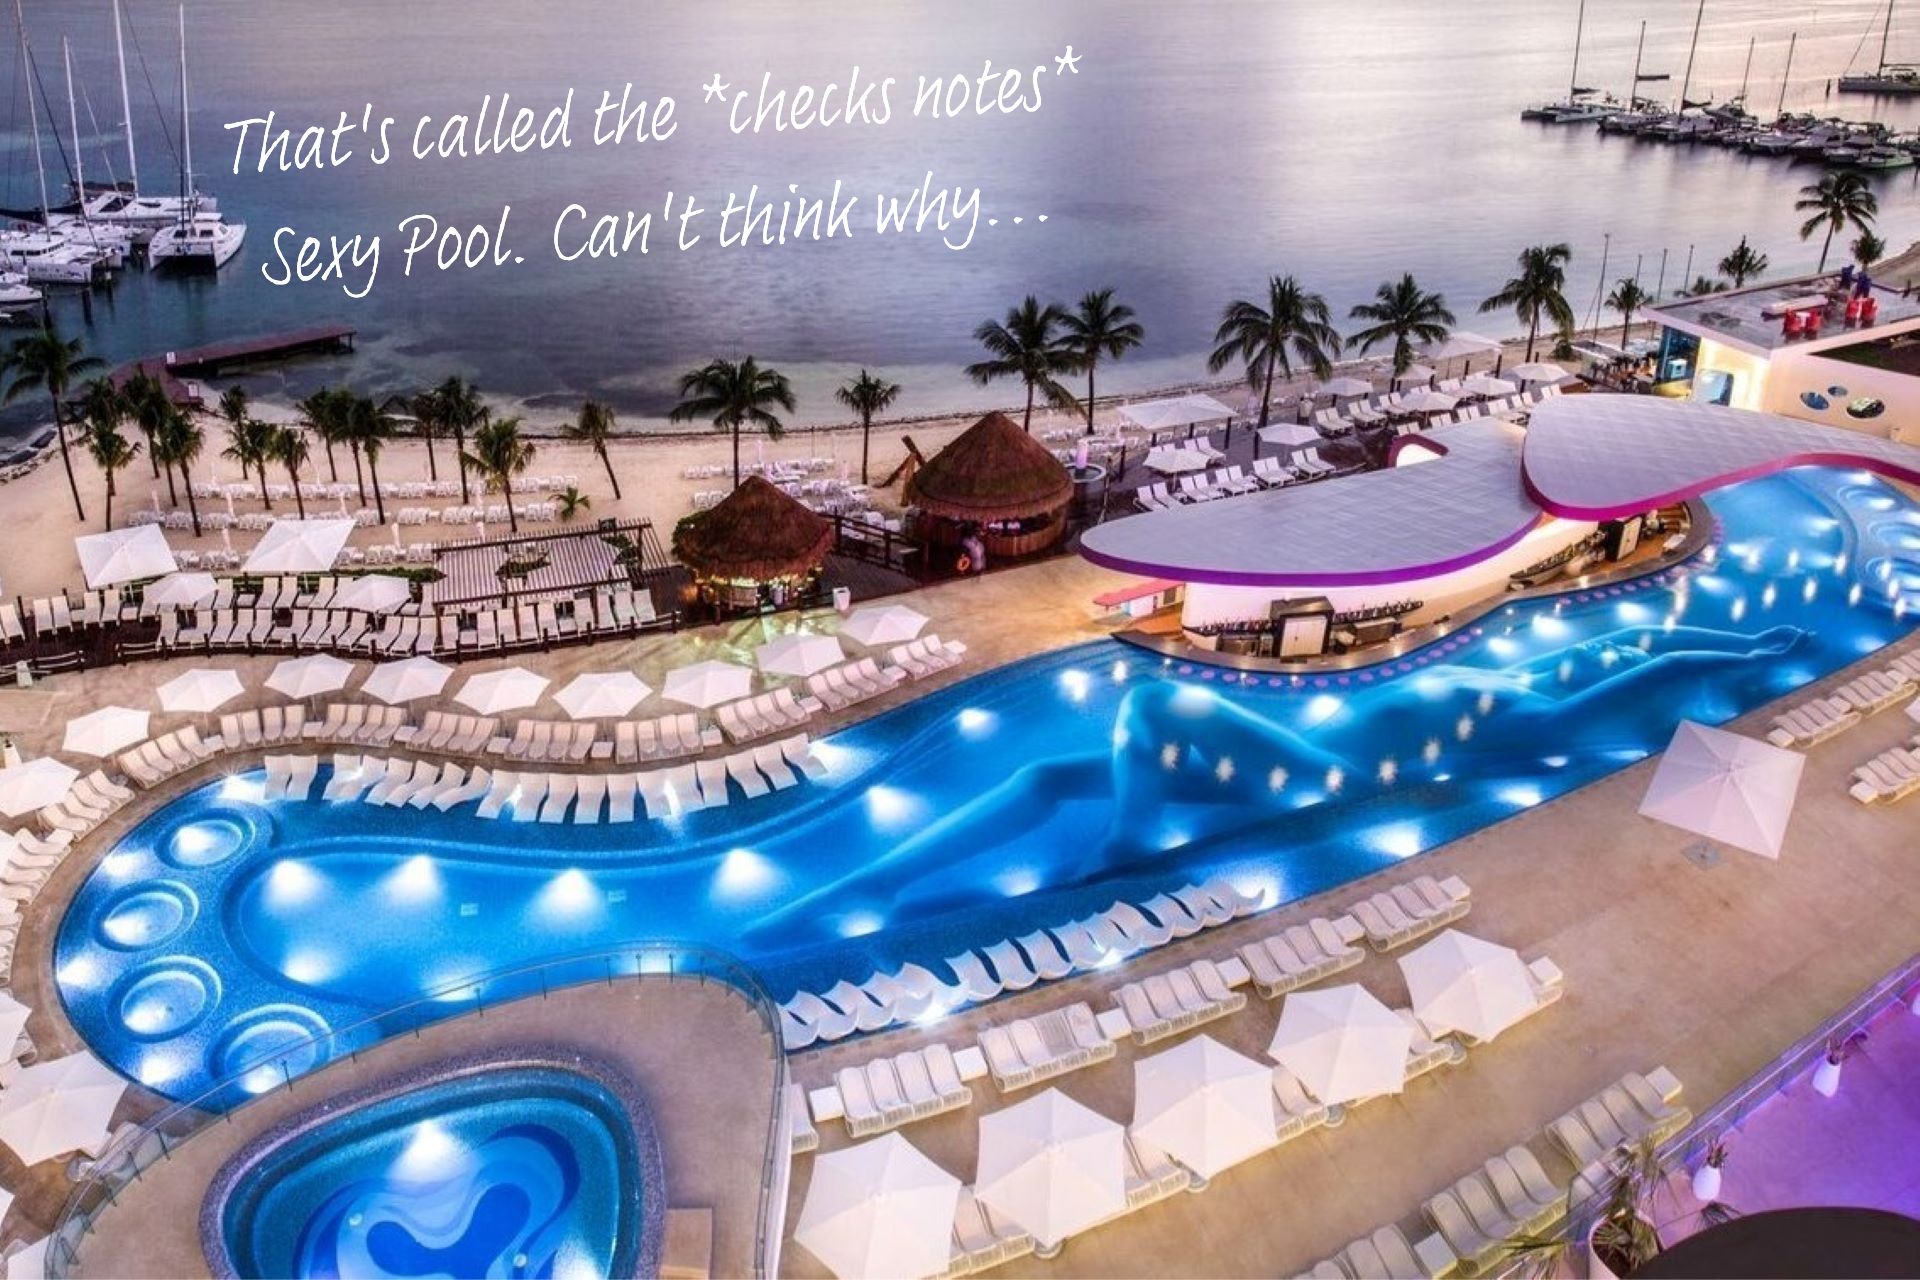 A bird's eye view of the Sexy Pool at Temptations Resort Cancun, famous for the image of a woman's body that runs along the pool floor.